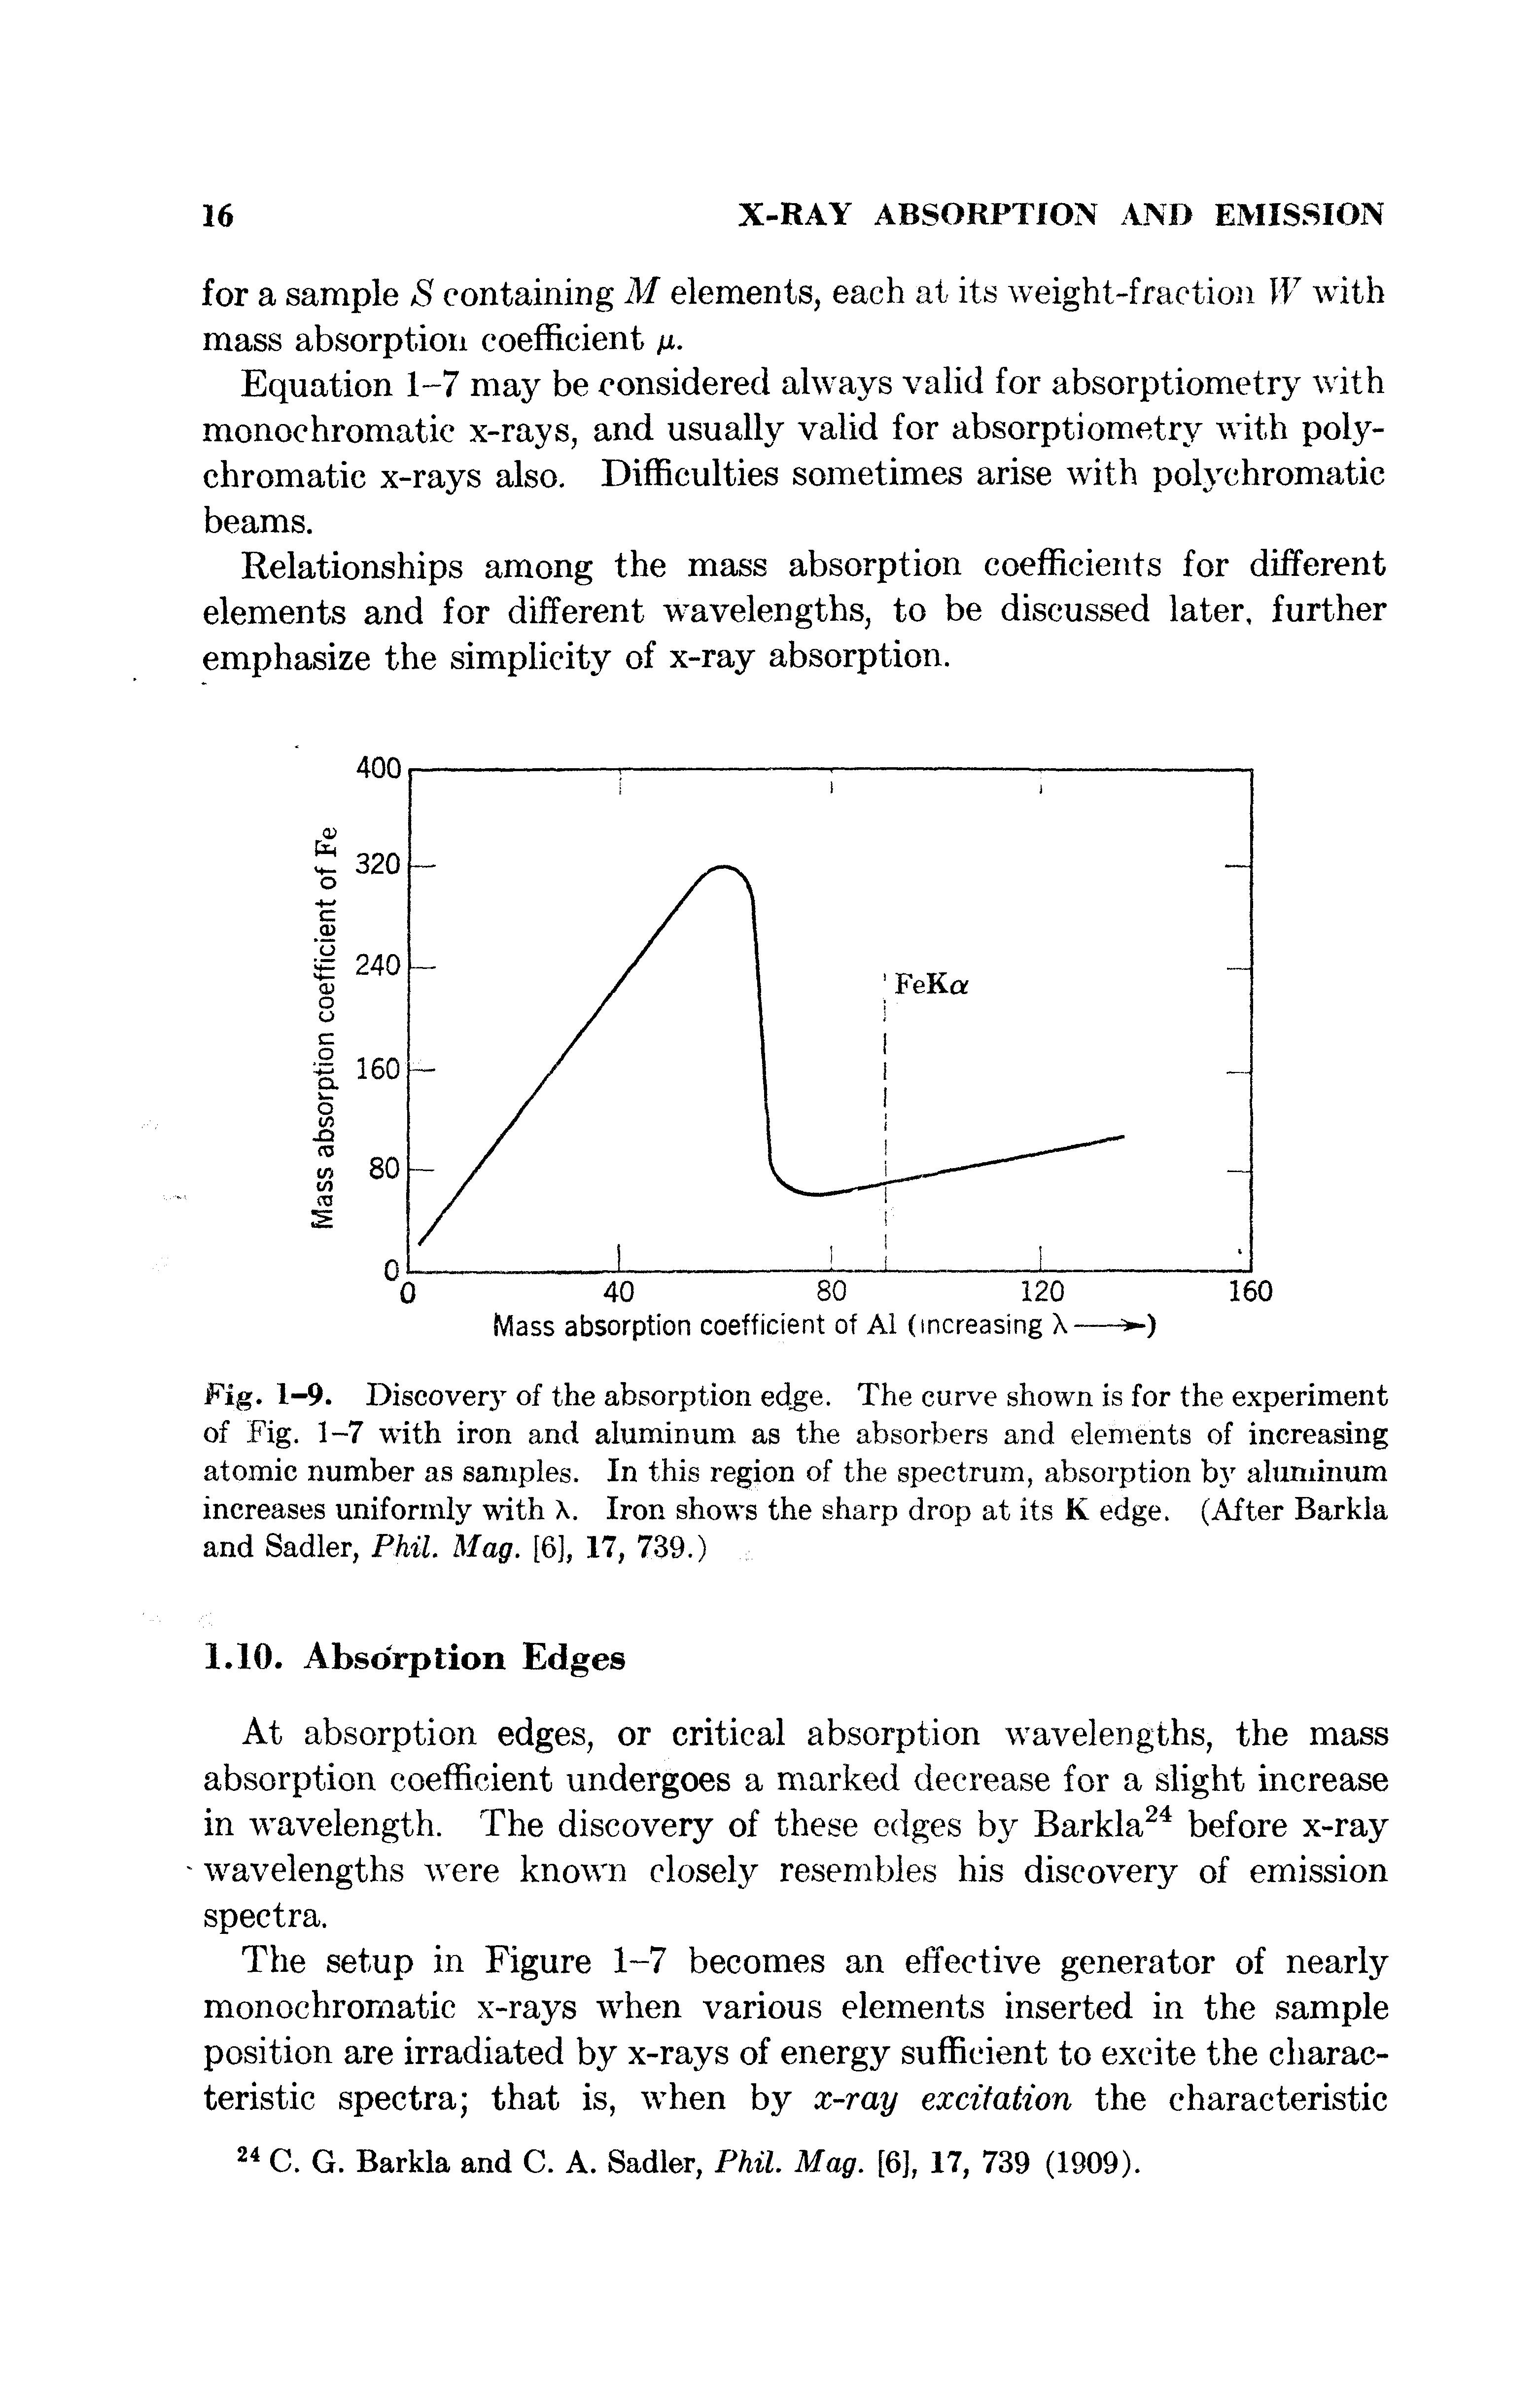 Fig. 1-9. Discover " of the absorption edge. The curve shown is for the experiment of Fig. 1-7 with iron and aluminum as the absorbers and elements of increasing atomic number as samples. In this region of the spectrum, absorption by aluminum increases uniformly with X. Iron shows the sharp drop at its K edge. (After Barkla and Sadler, Phil. Mag. [6], 17, 739.)...